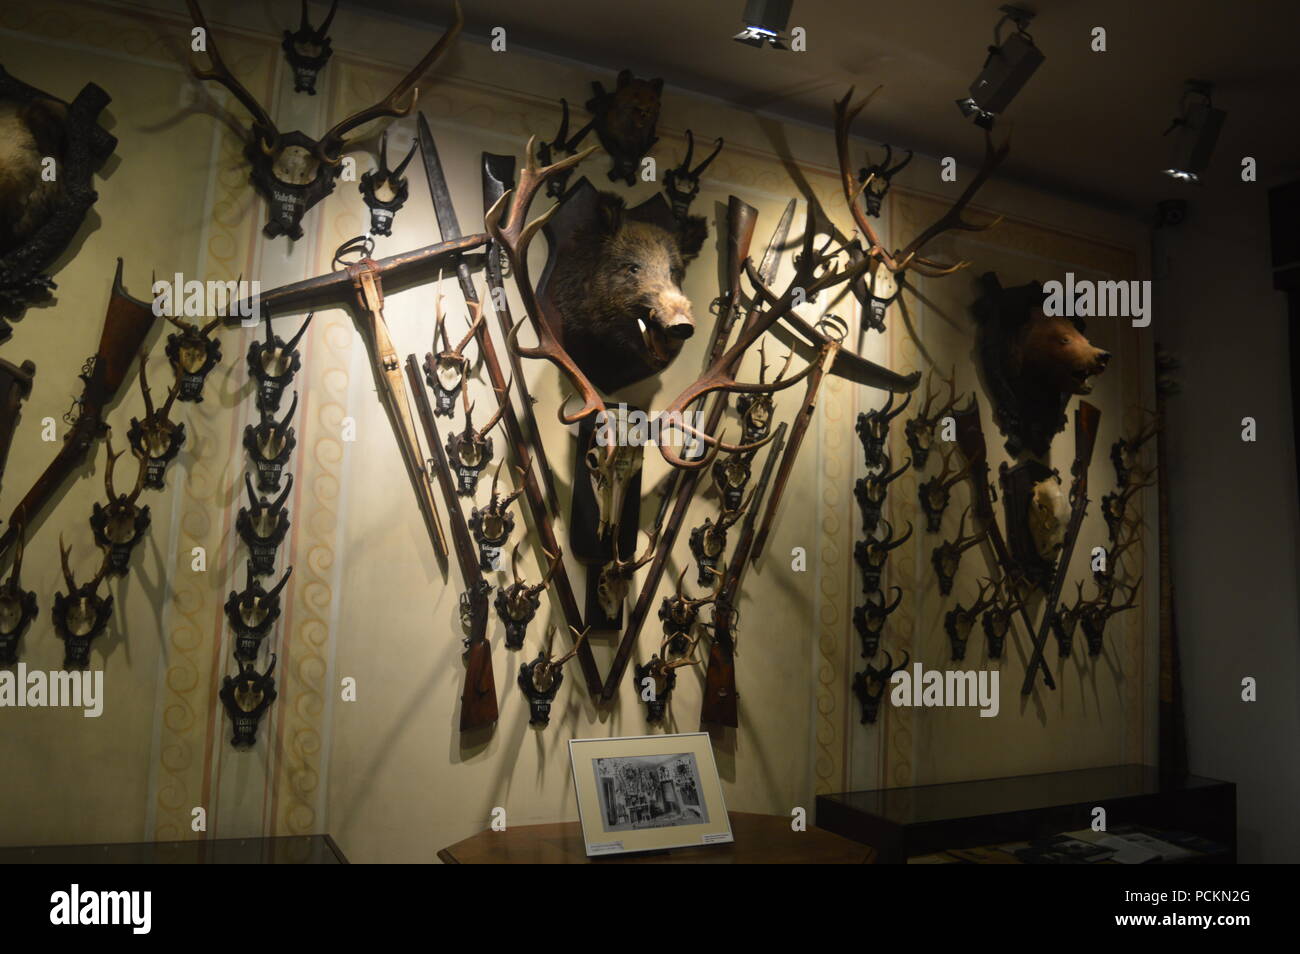 The 'august von spiess' museum of hunting Stock Photo